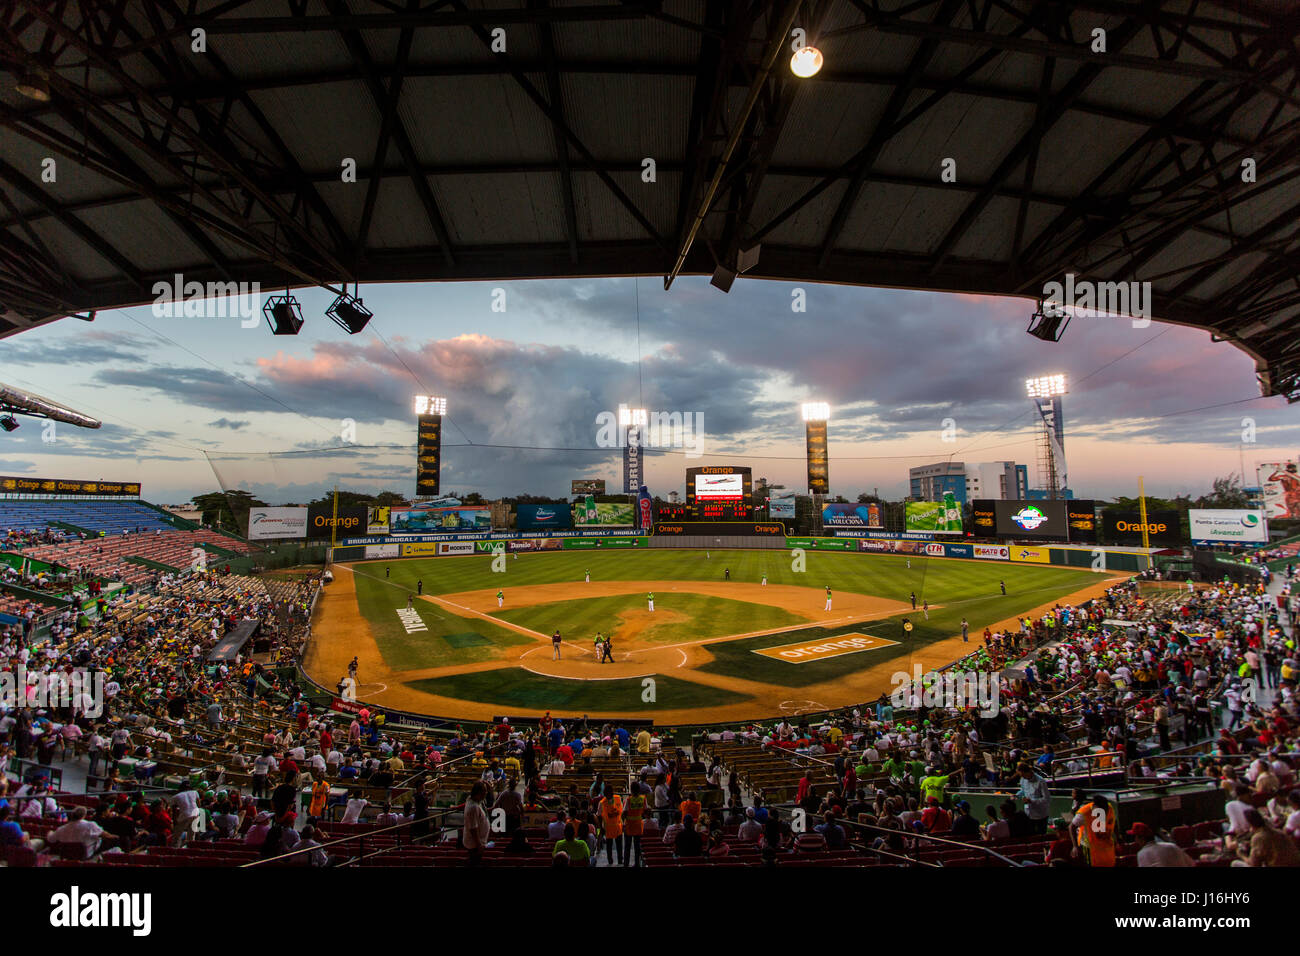 A Baseball Stadium In The Dominican Republic At Sunset Stock Photo